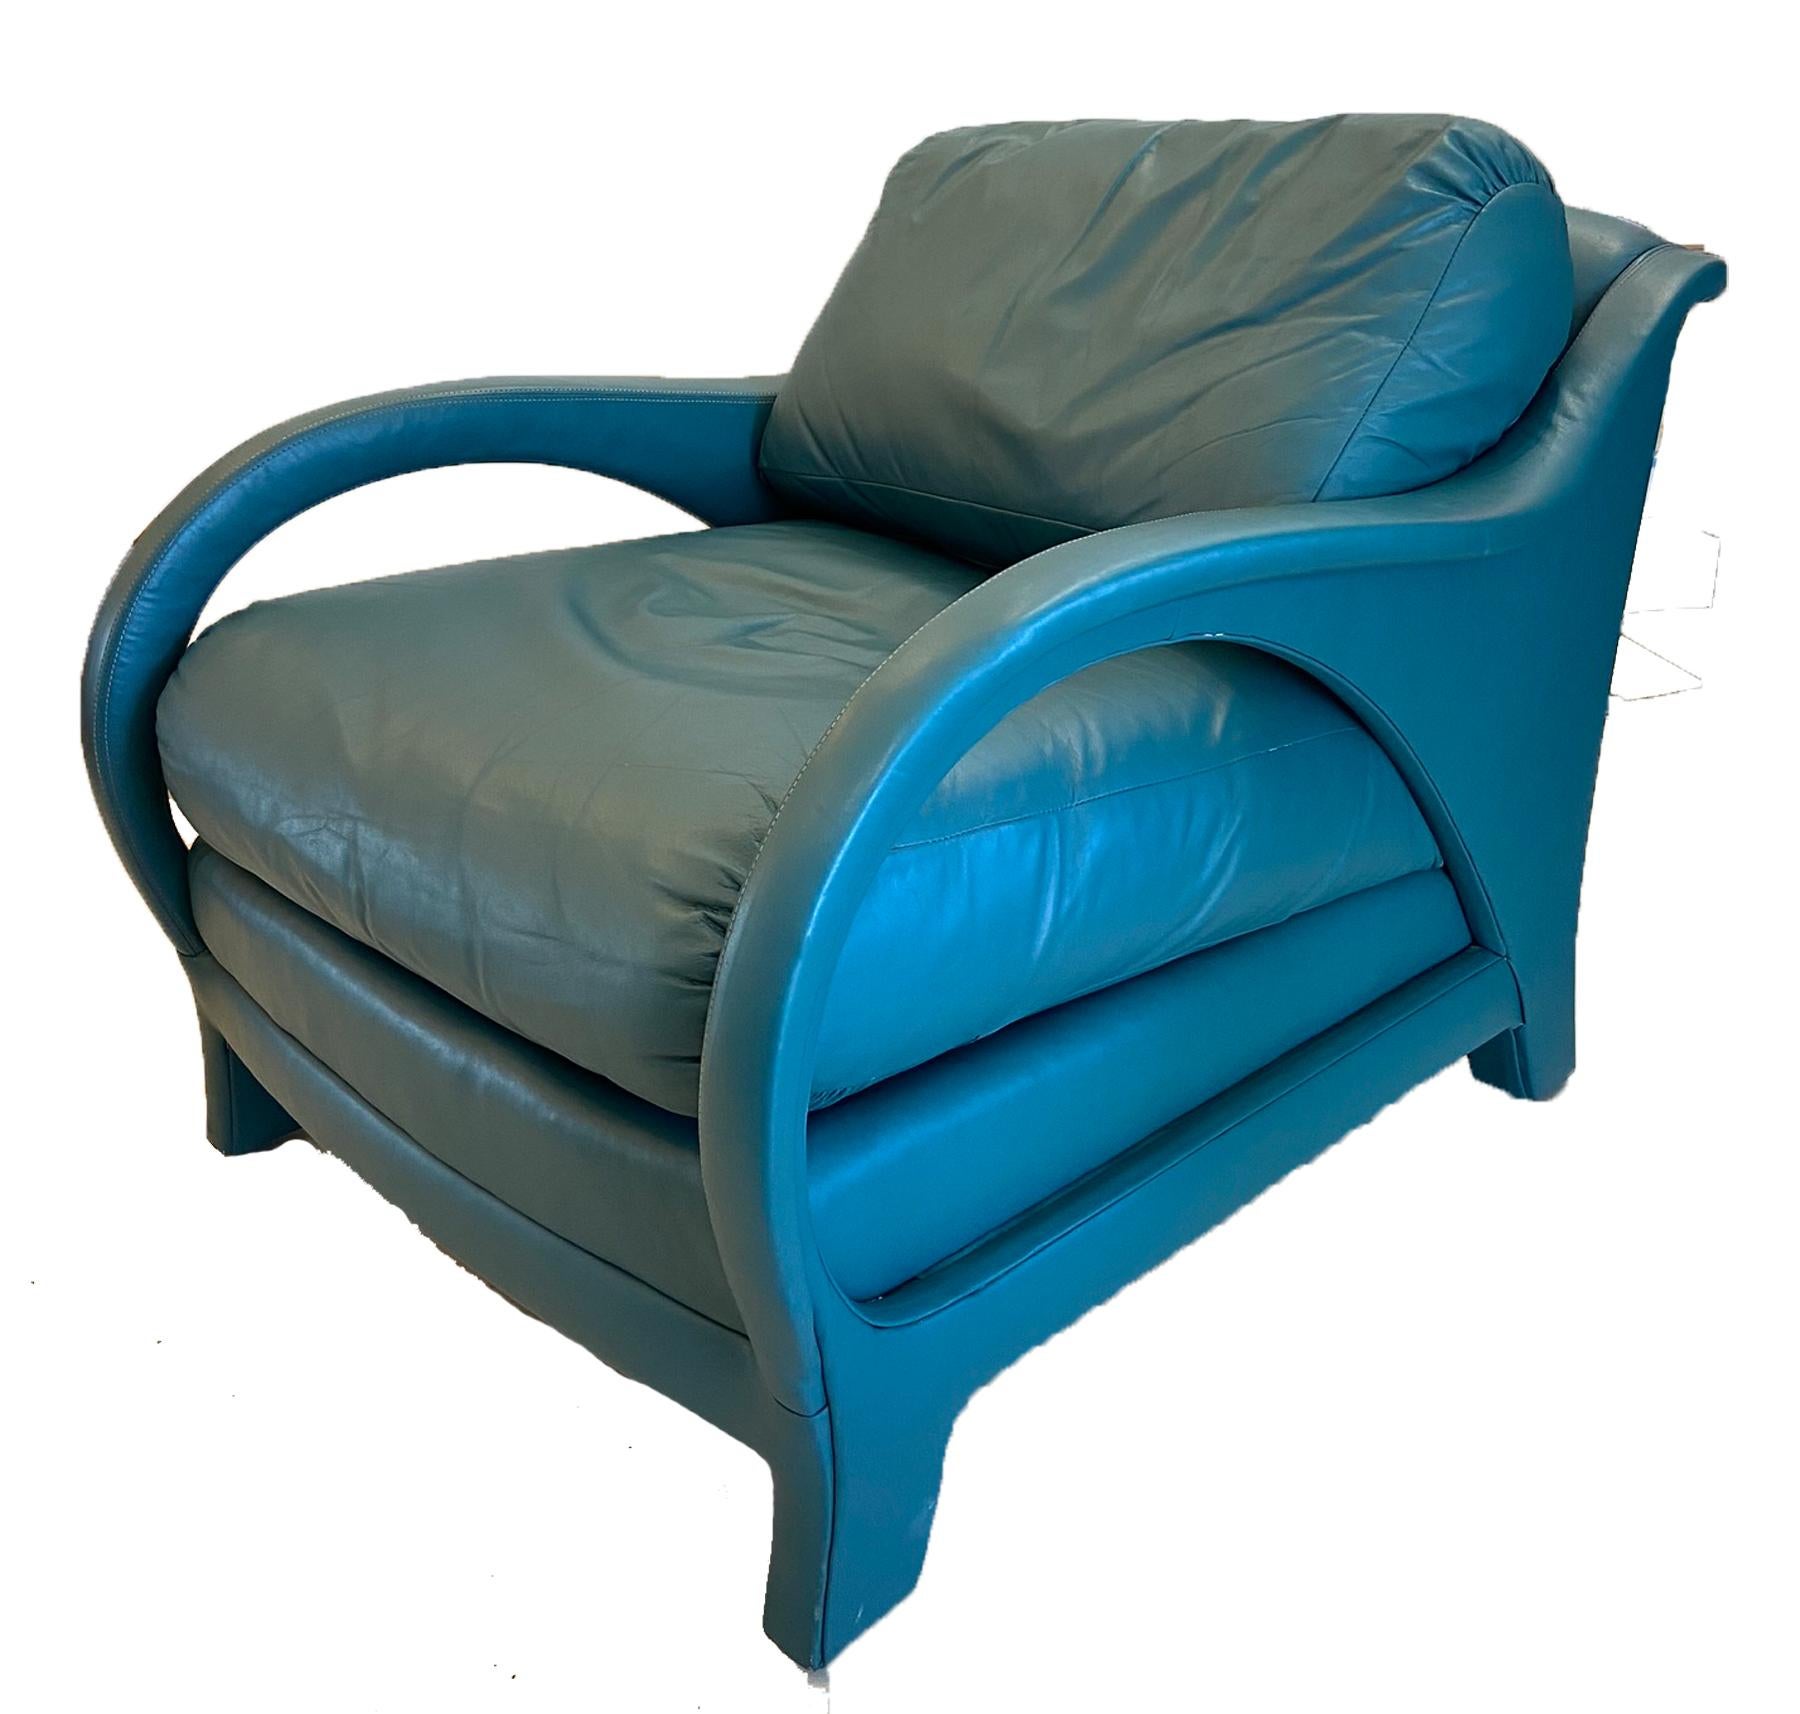 Pair of Jay Spectre tycoon lounge chairs in dyed leather. Designed by Jay Spectre for Century furniture co. Overall in very good condition with no tears or stains to leather.